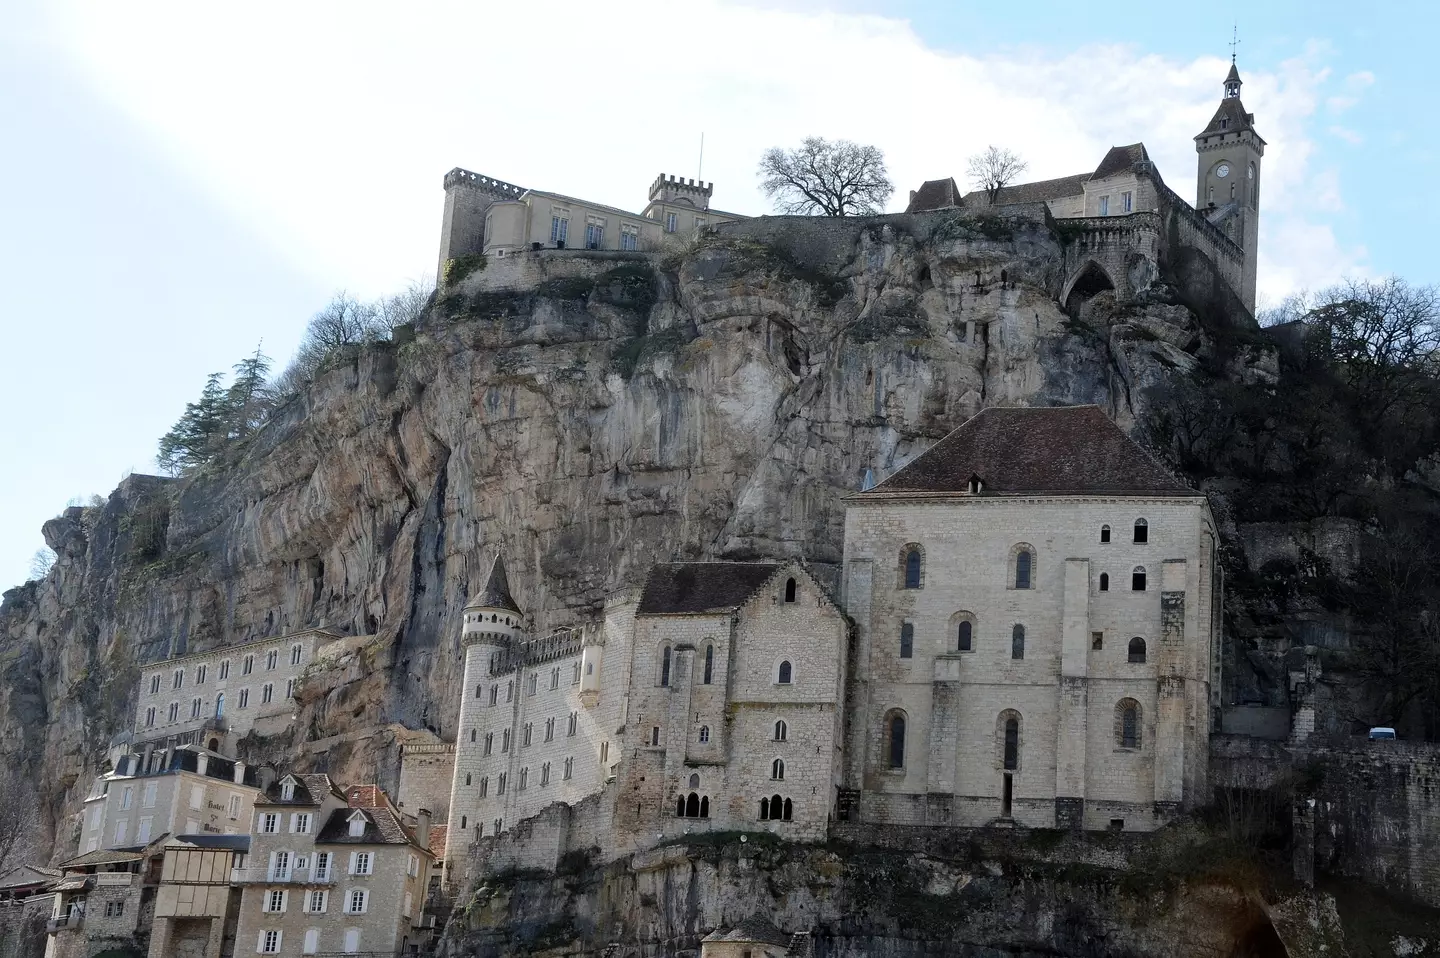 The sword reportedly vanished from the Pyrenean village of Rocamadour, where it had been wedged into a rock high off the ground for about 1,300 years. (PASCAL PAVANI/AFP via Getty Images)